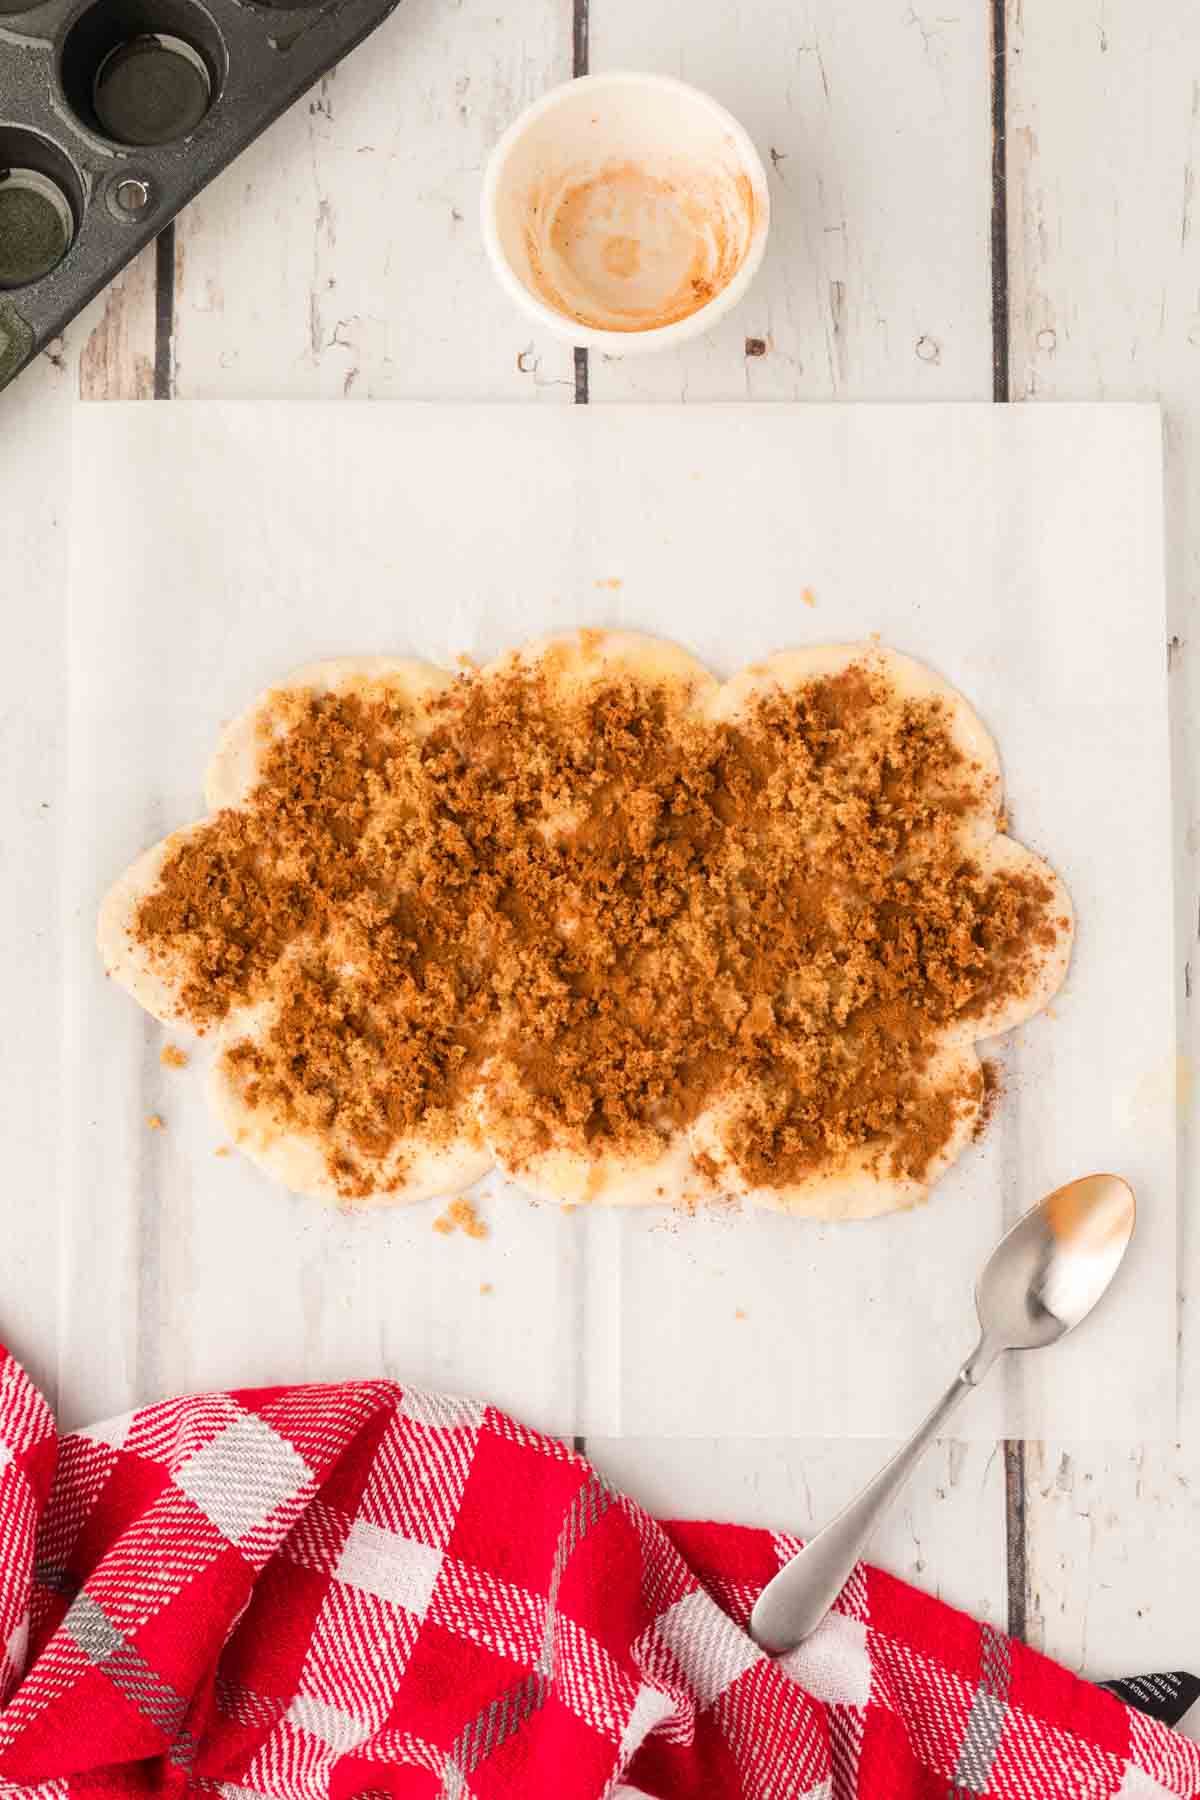 Sprinkle brown sugar mixture on the parchment paper